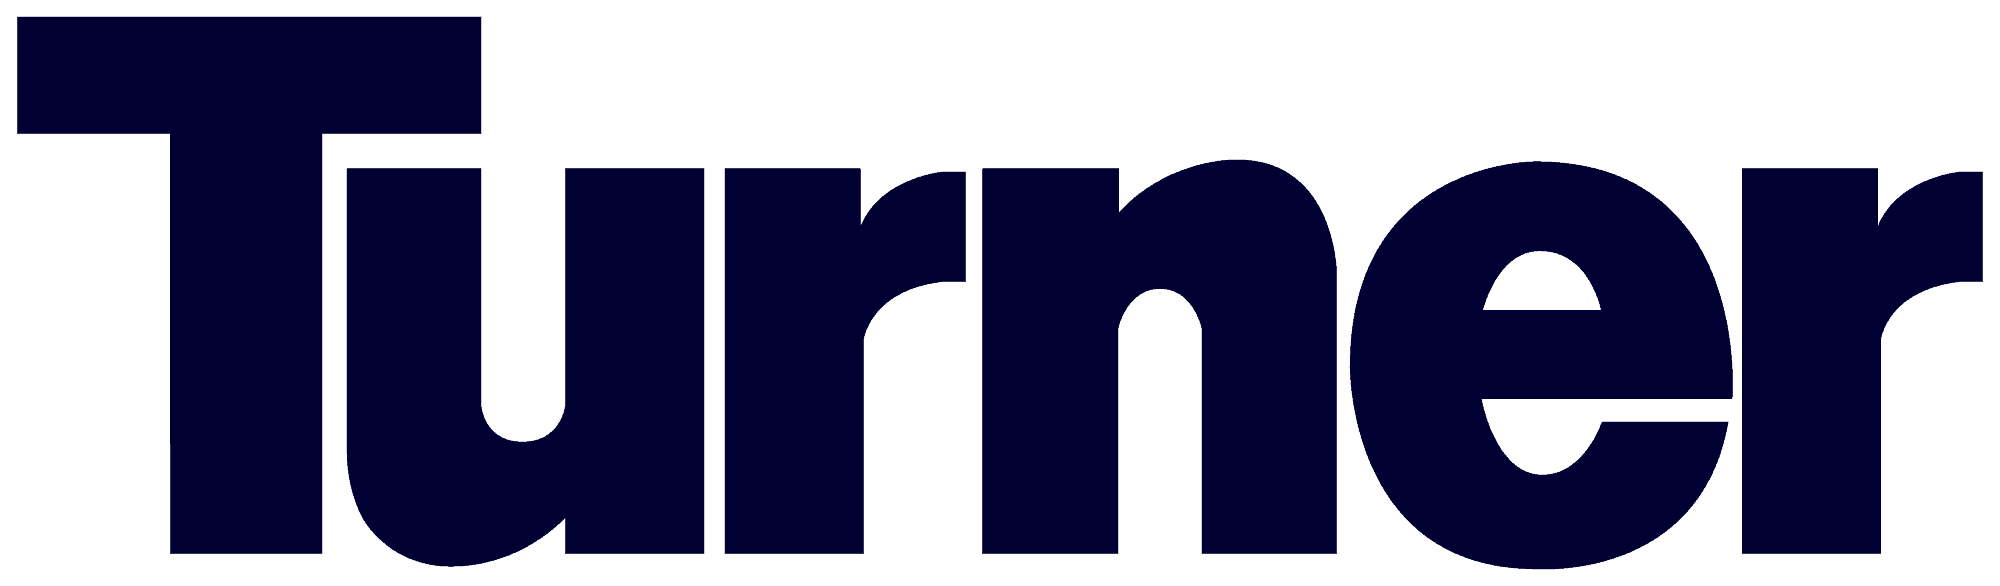 An image of a dark blue background with technology startups.